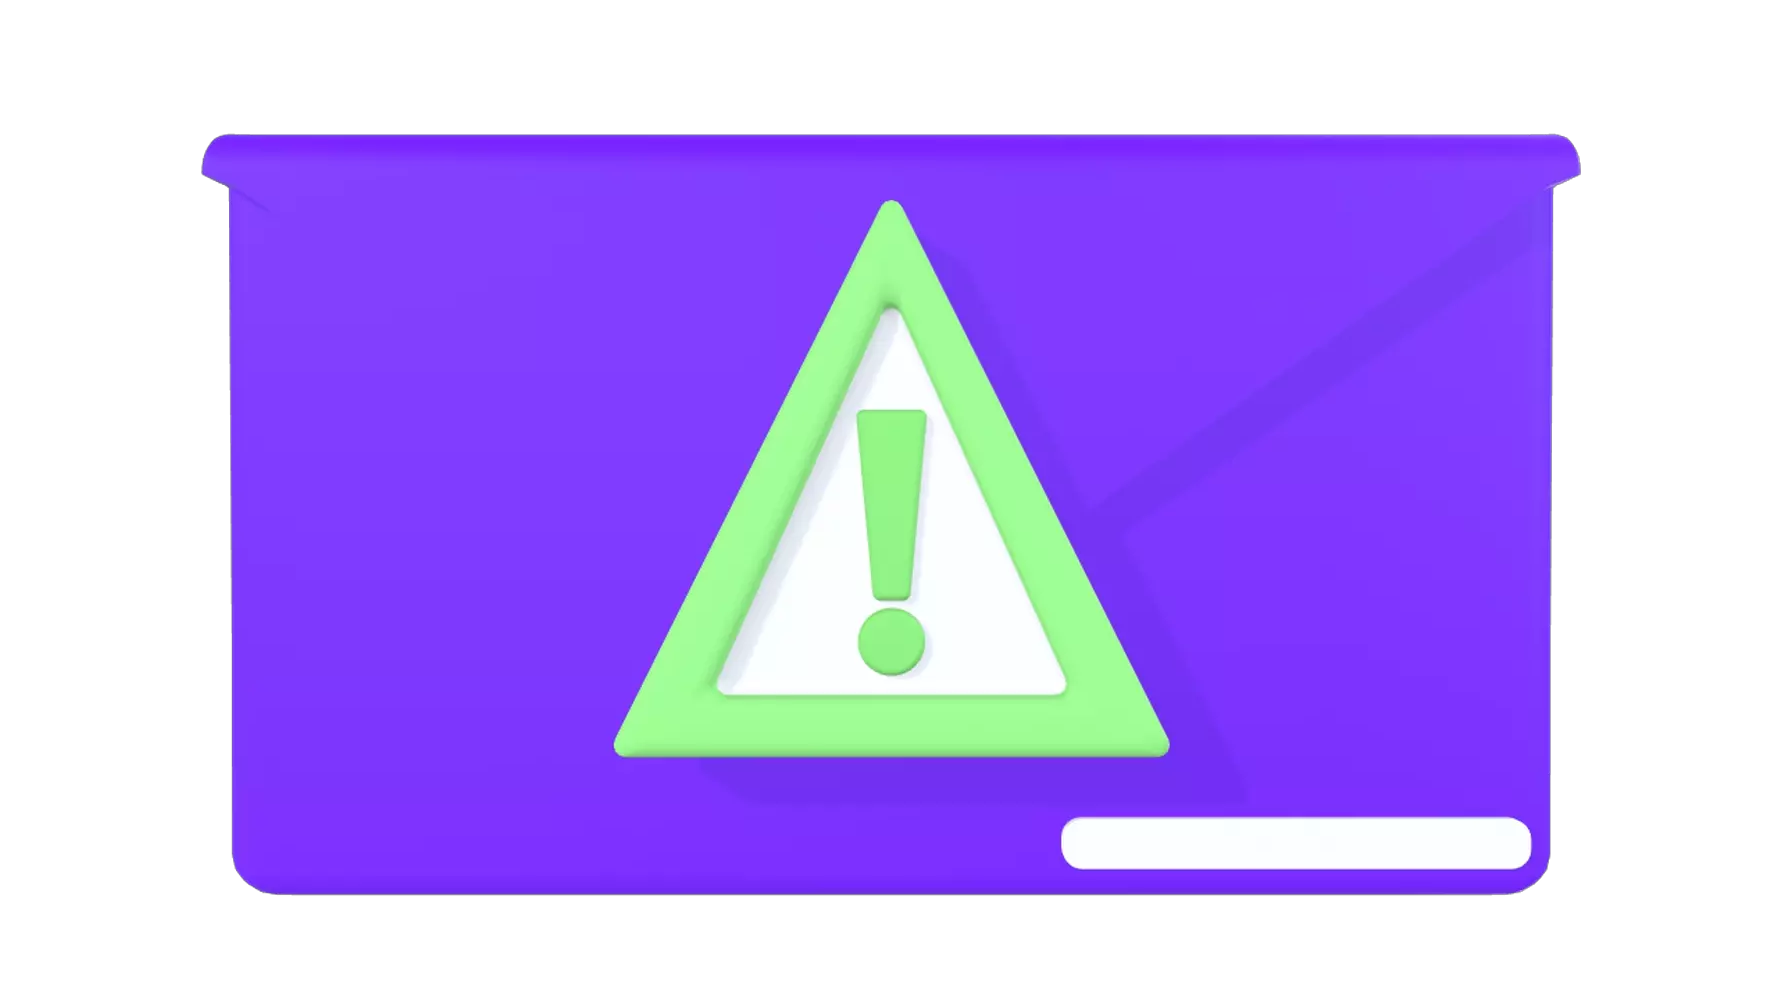 Email Warning 3D Graphic